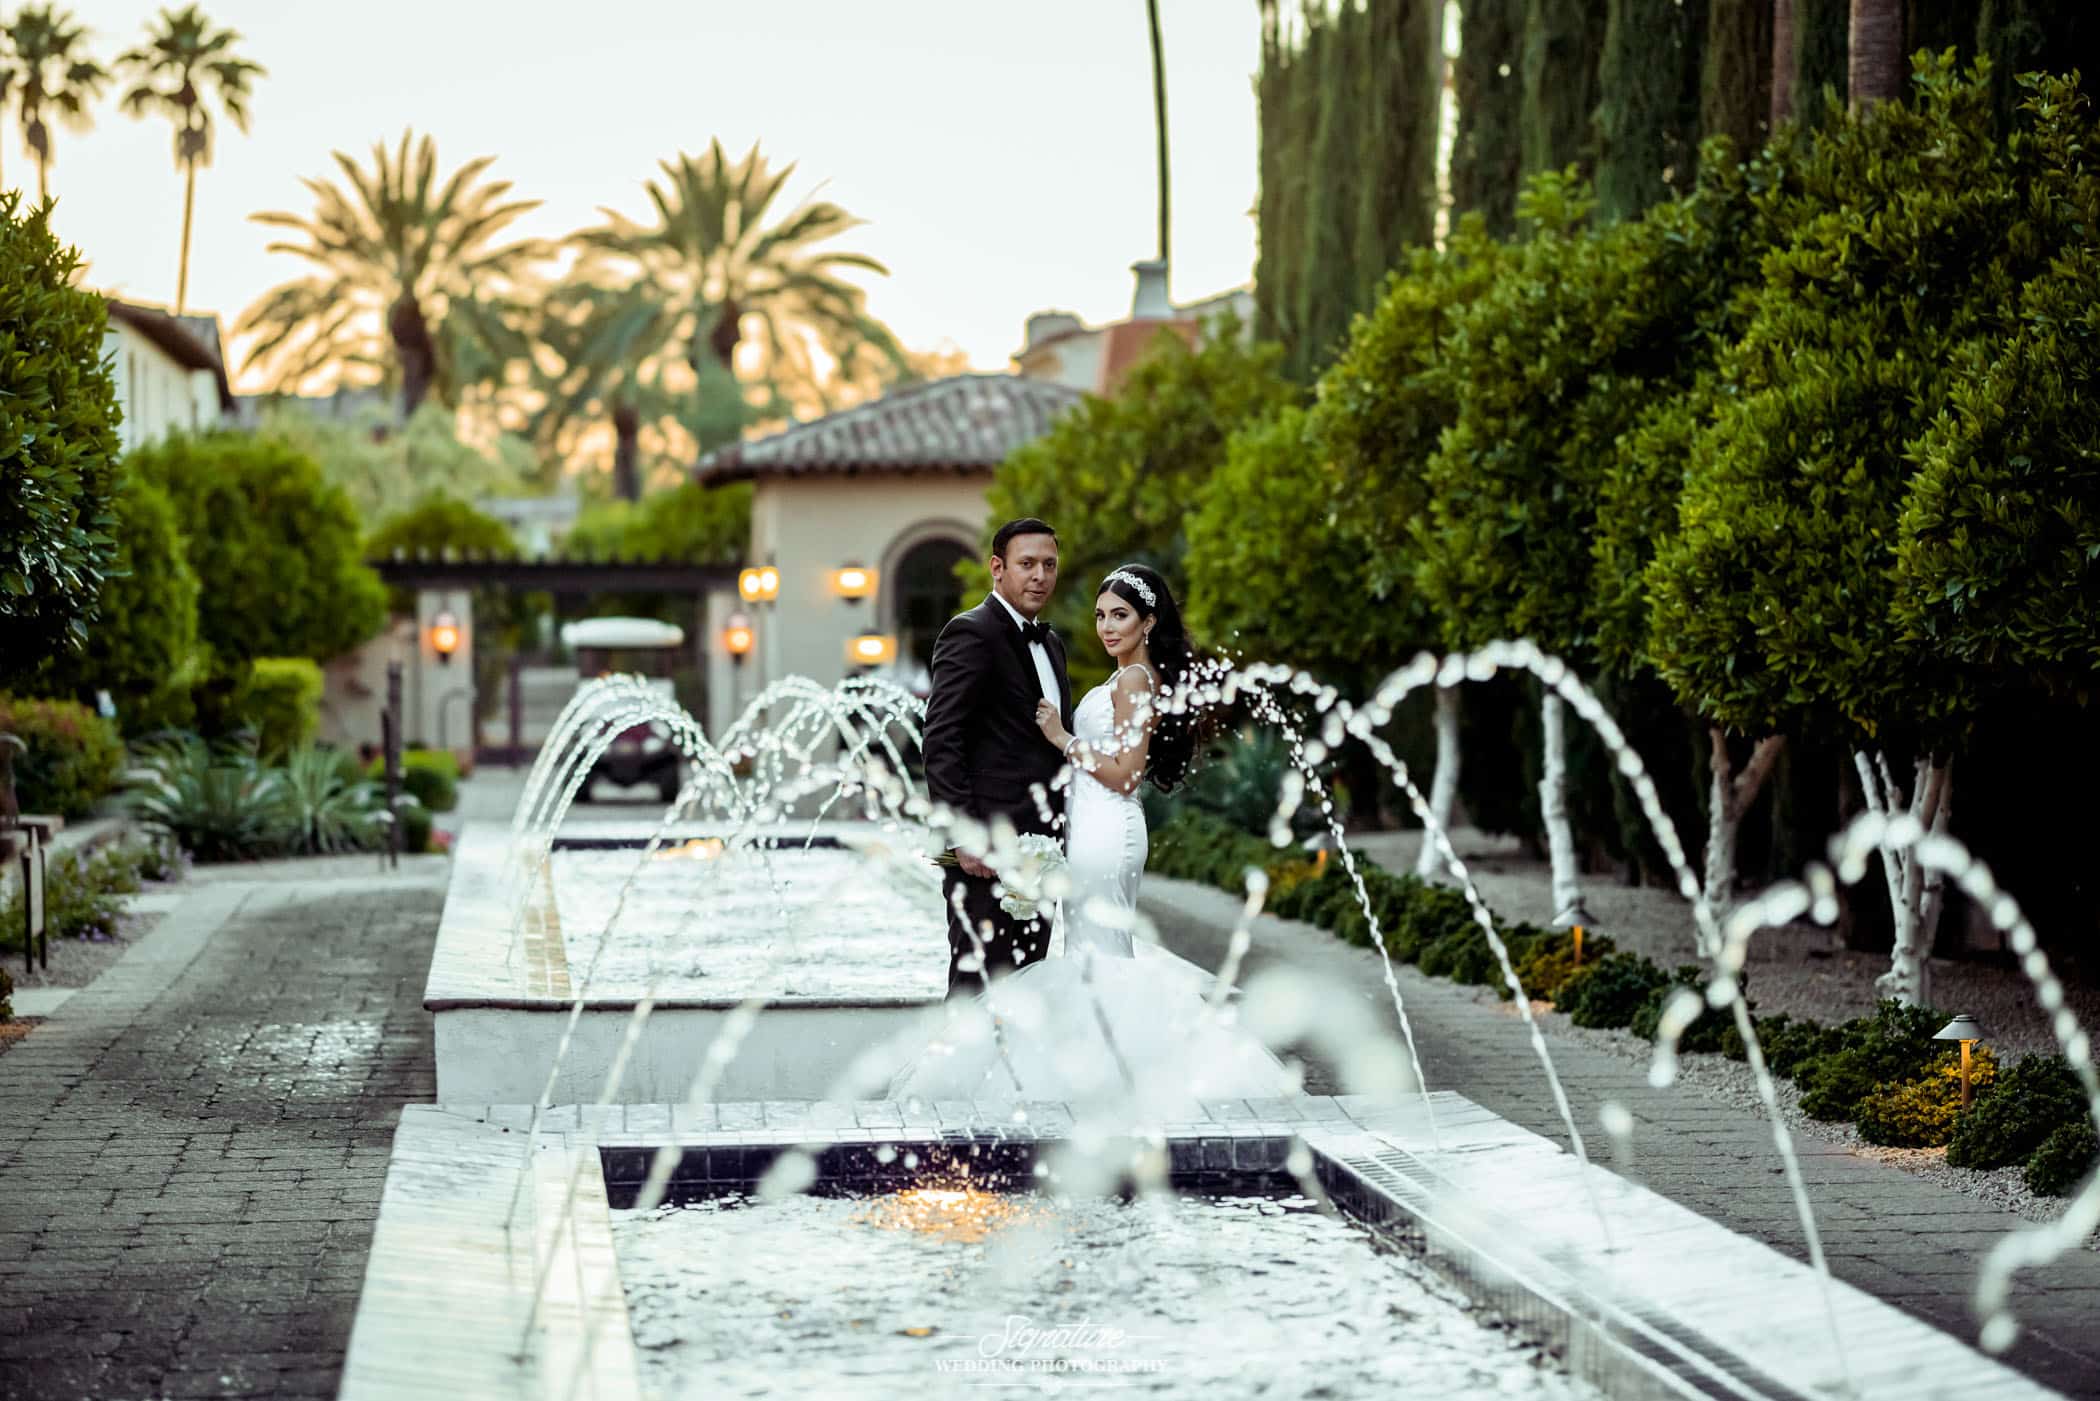 Bride and groom between water fountains